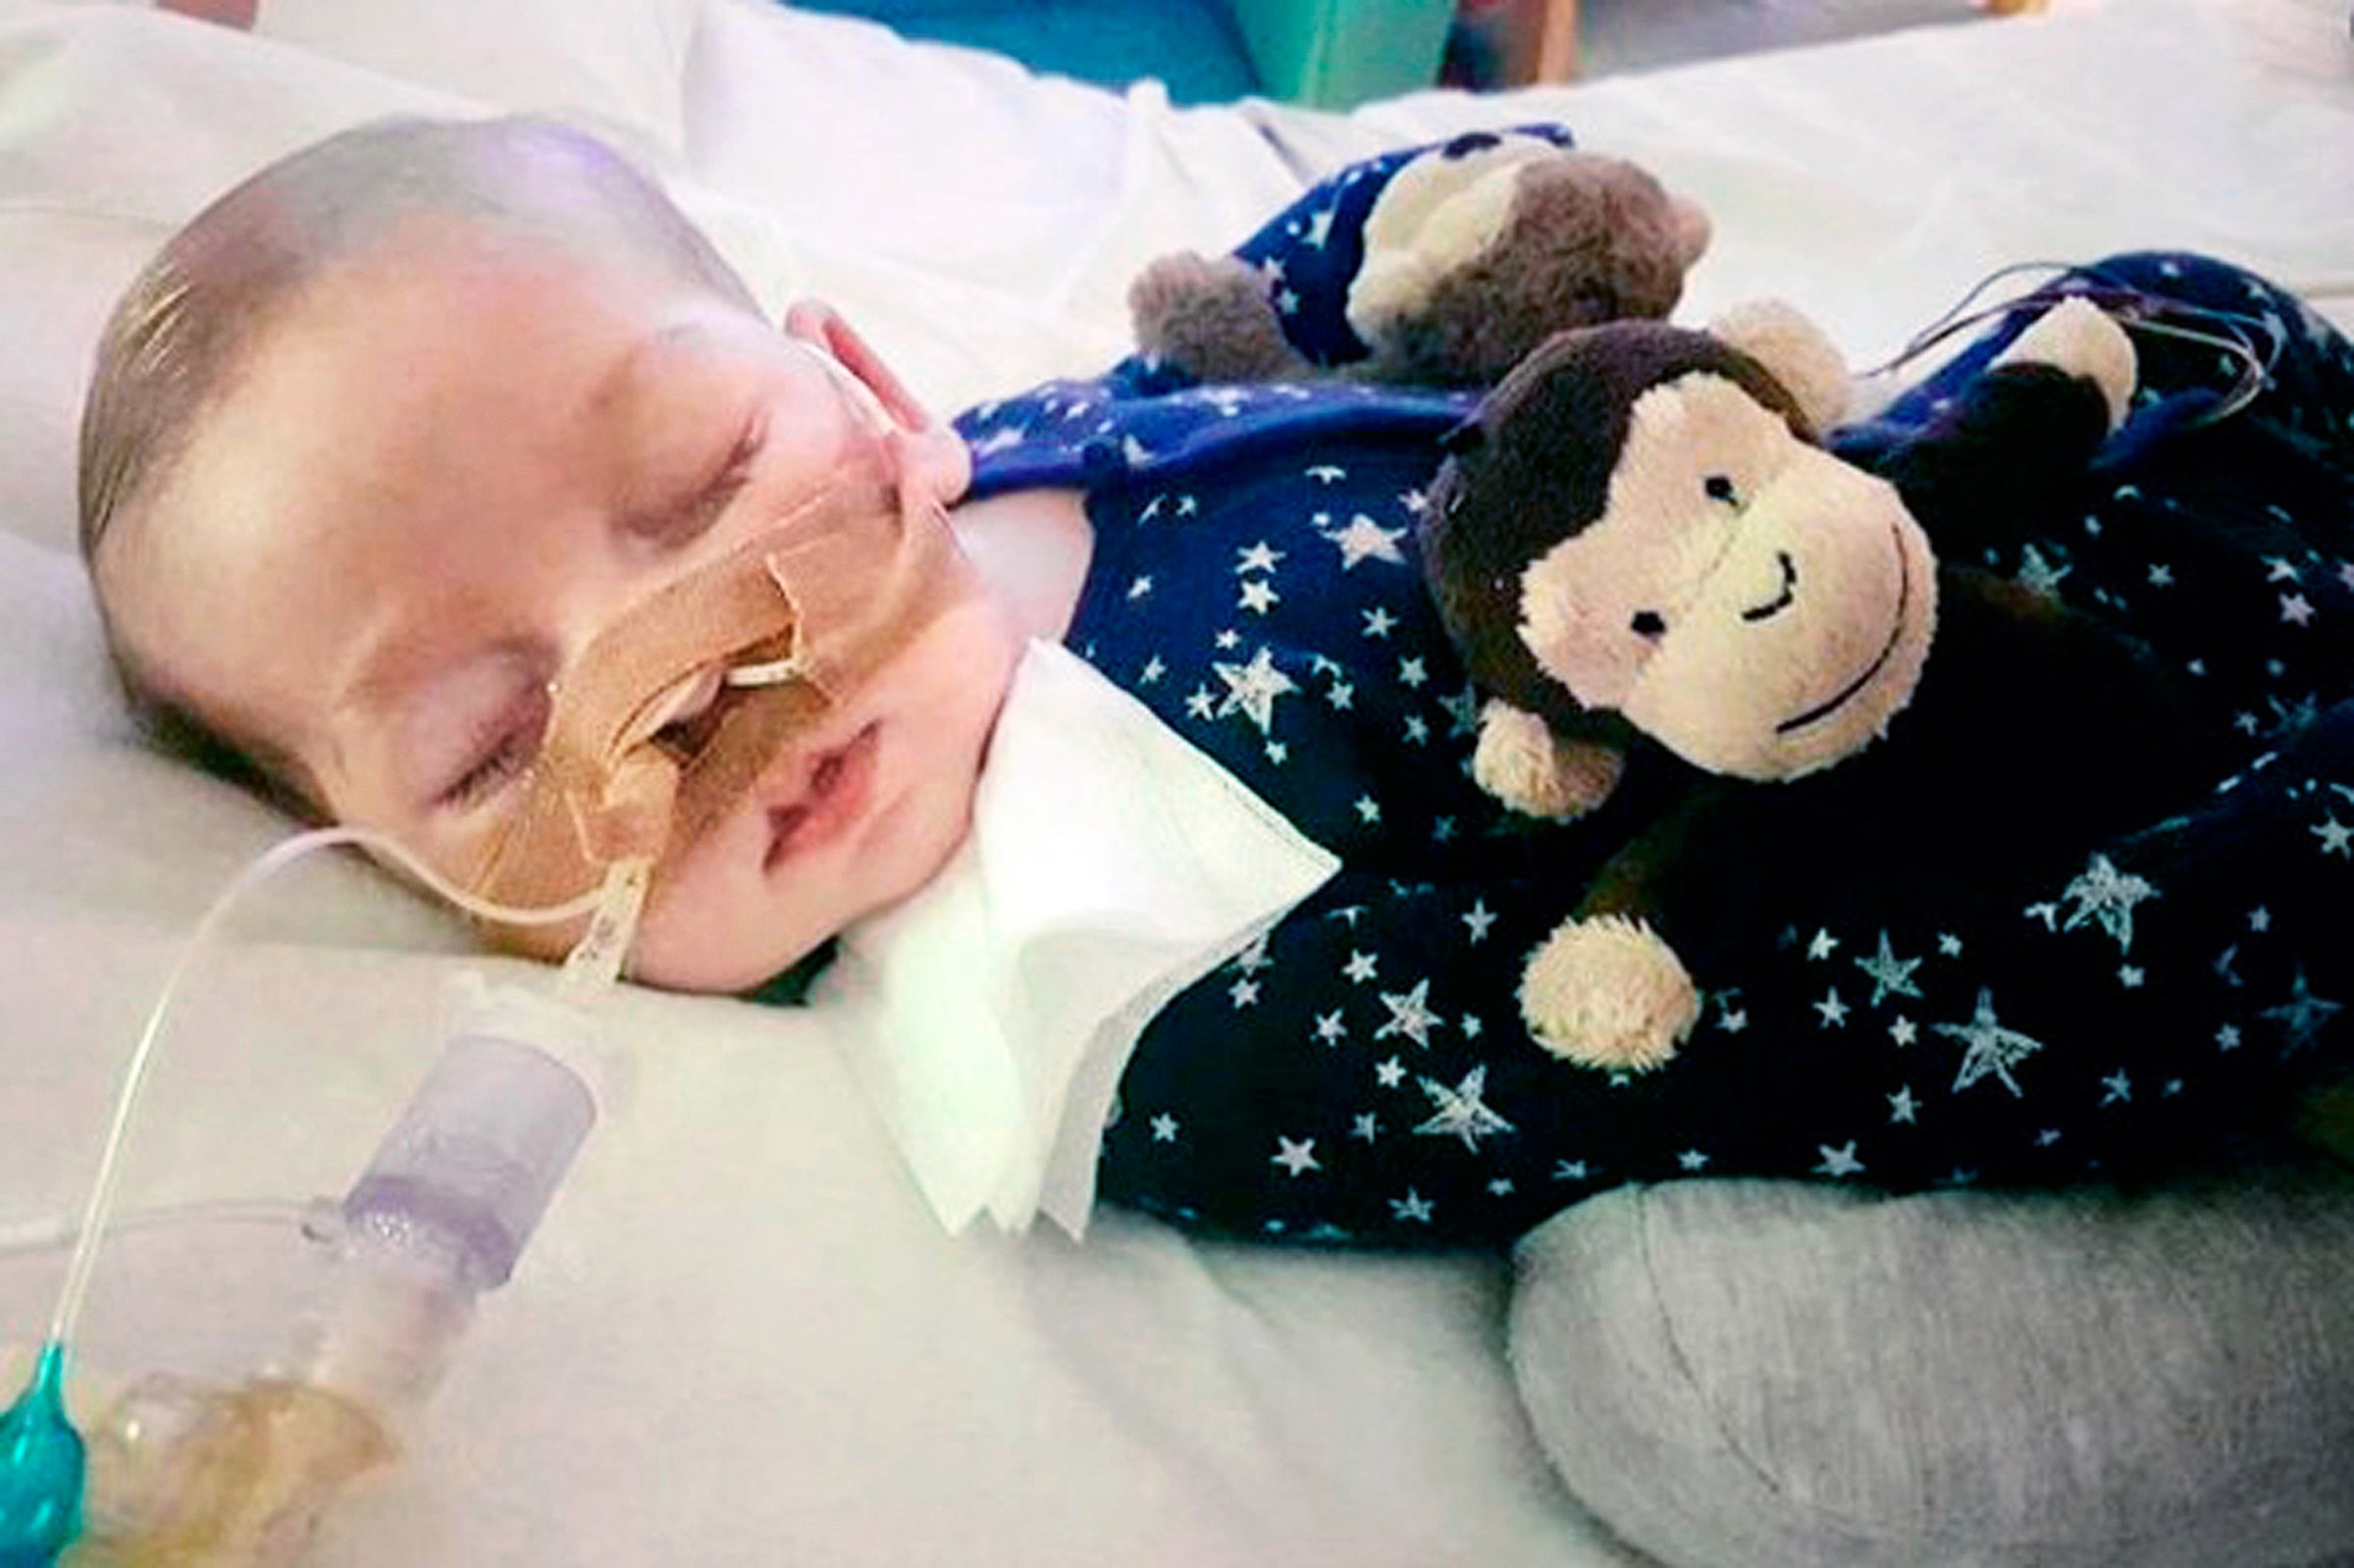 Charlie Gard’s parents are fighting doctors for the right to treat him with an experimental therapy